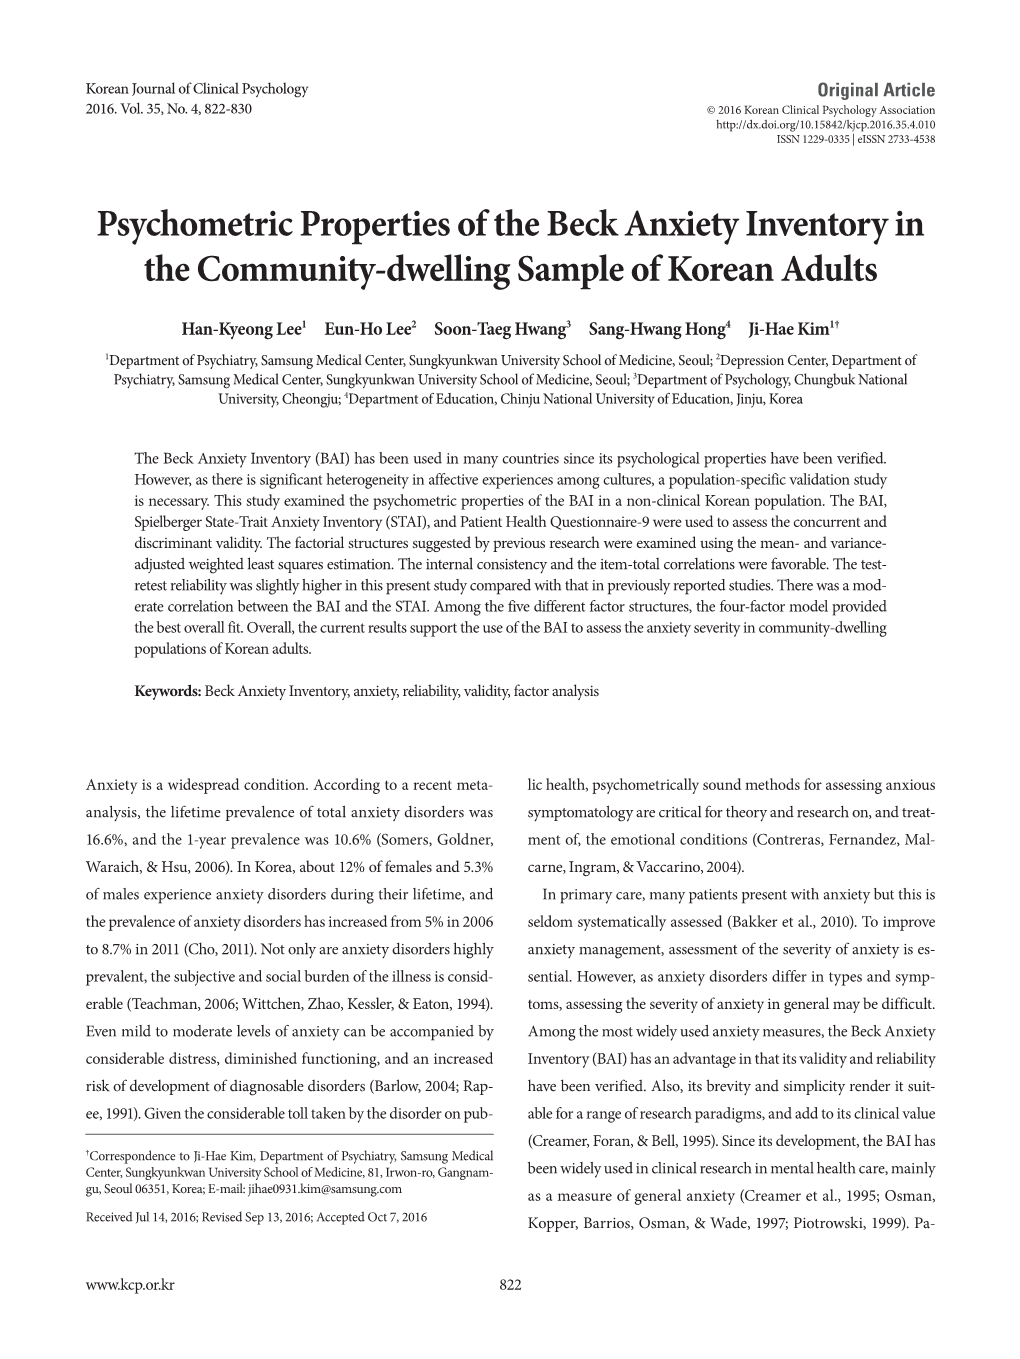 Psychometric Properties of the Beck Anxiety Inventory in the Community-Dwelling Sample of Korean Adults